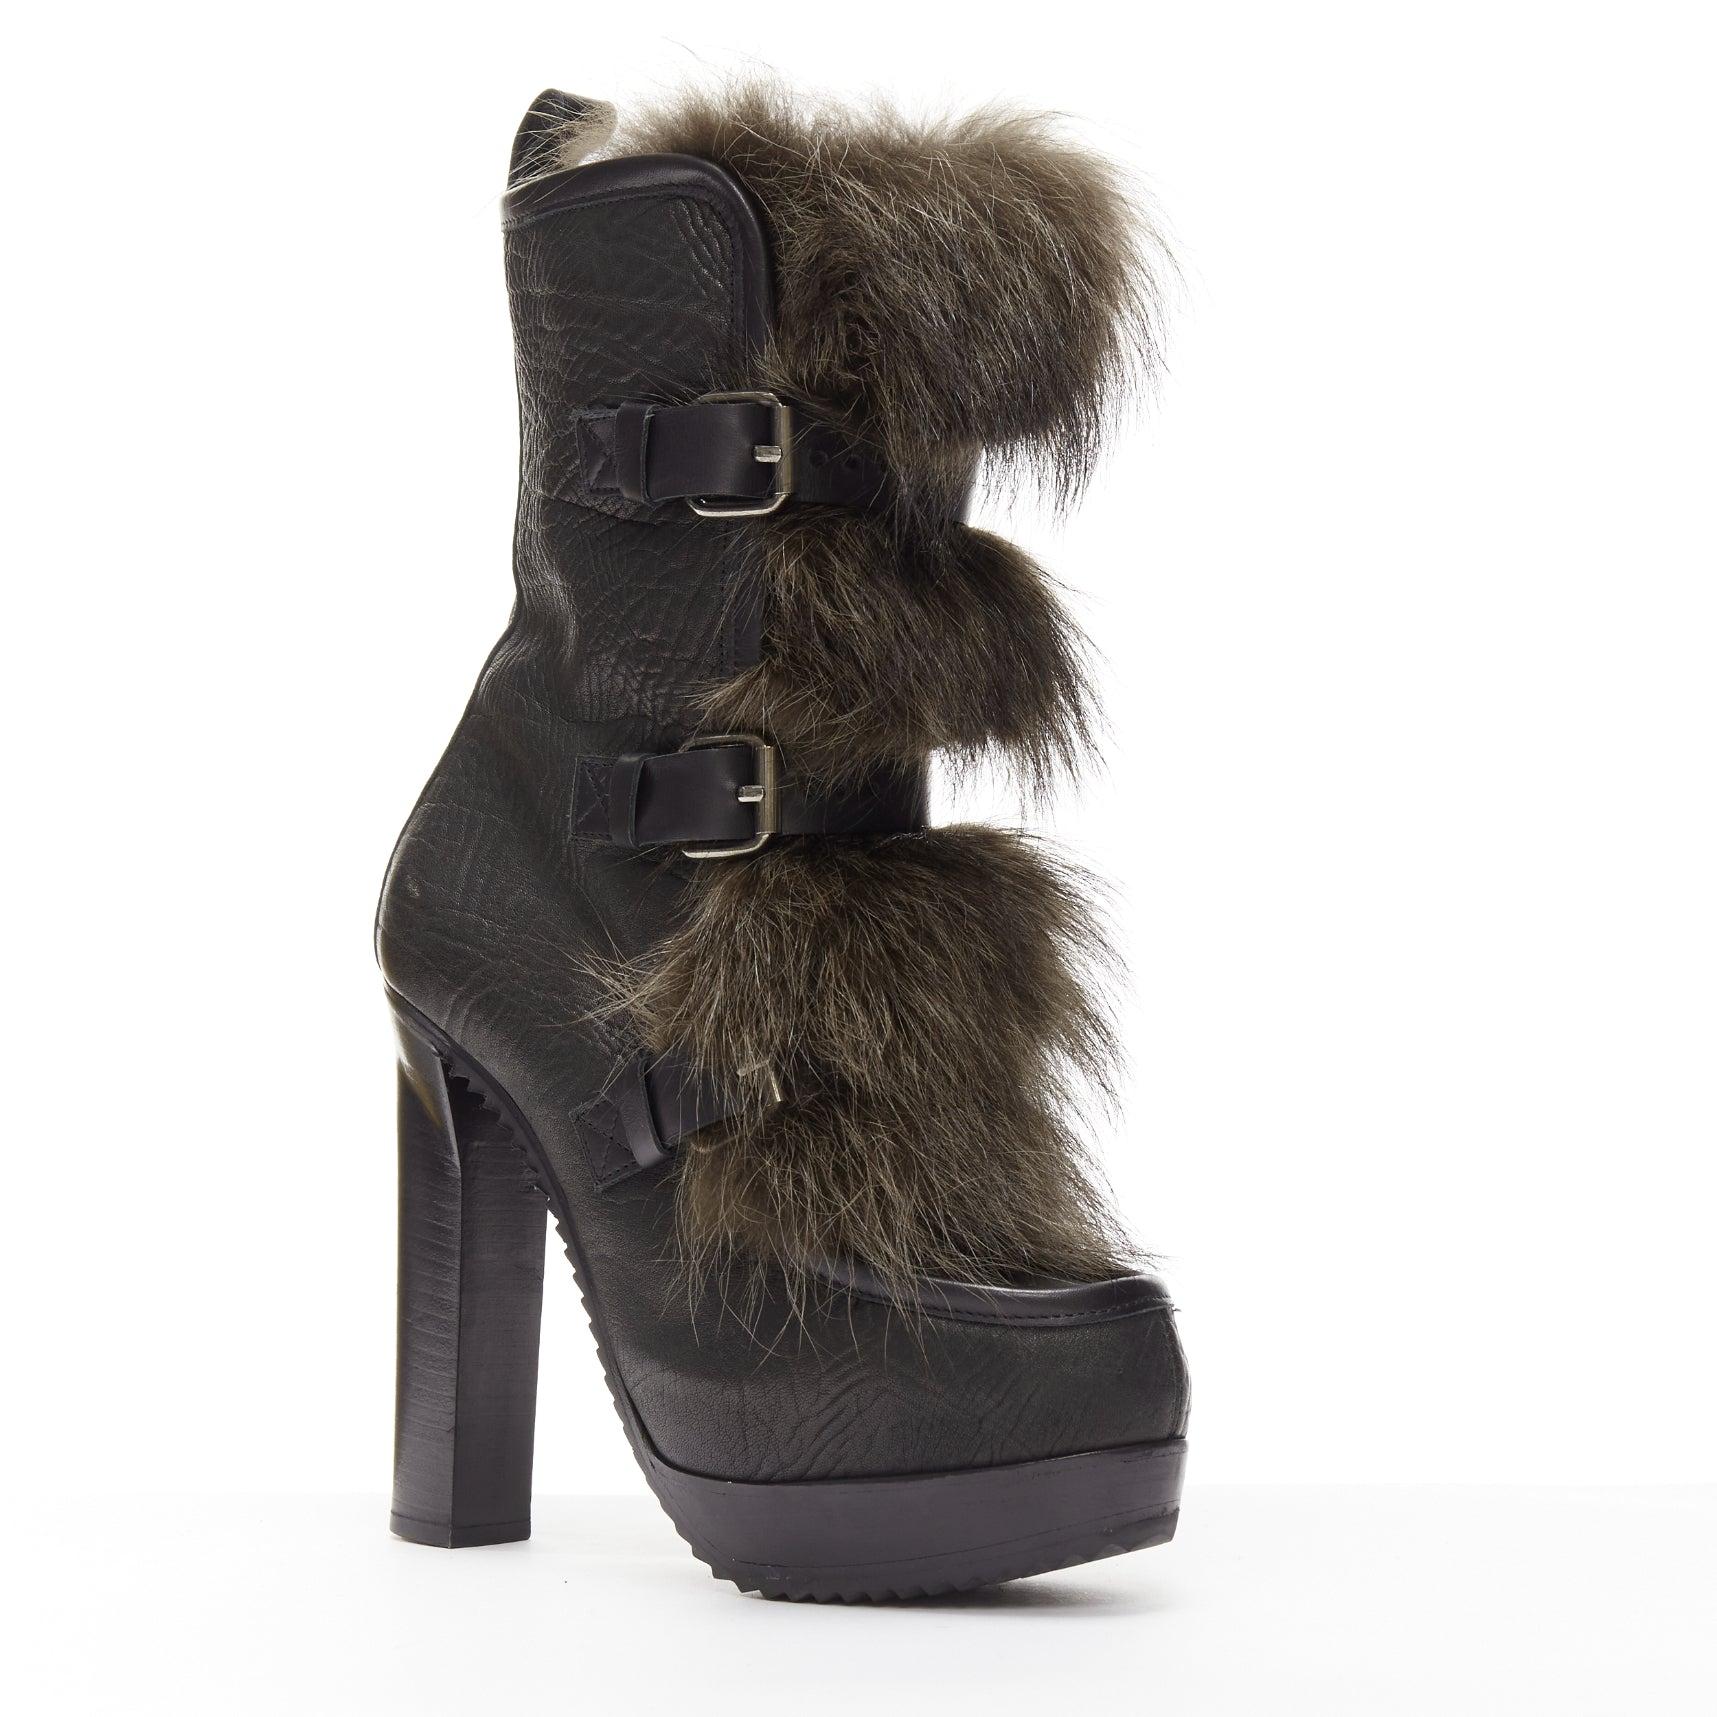 PIERRE HARDY black grained leather fur front trio buckle platform boot EU37.5
Reference: NKLL/A00130
Brand: Pierre Hardy
Material: Leather, Fur
Color: Black, Brown
Pattern: Solid
Closure: Buckle
Lining: Black Leather
Extra Details: Fur trim front.